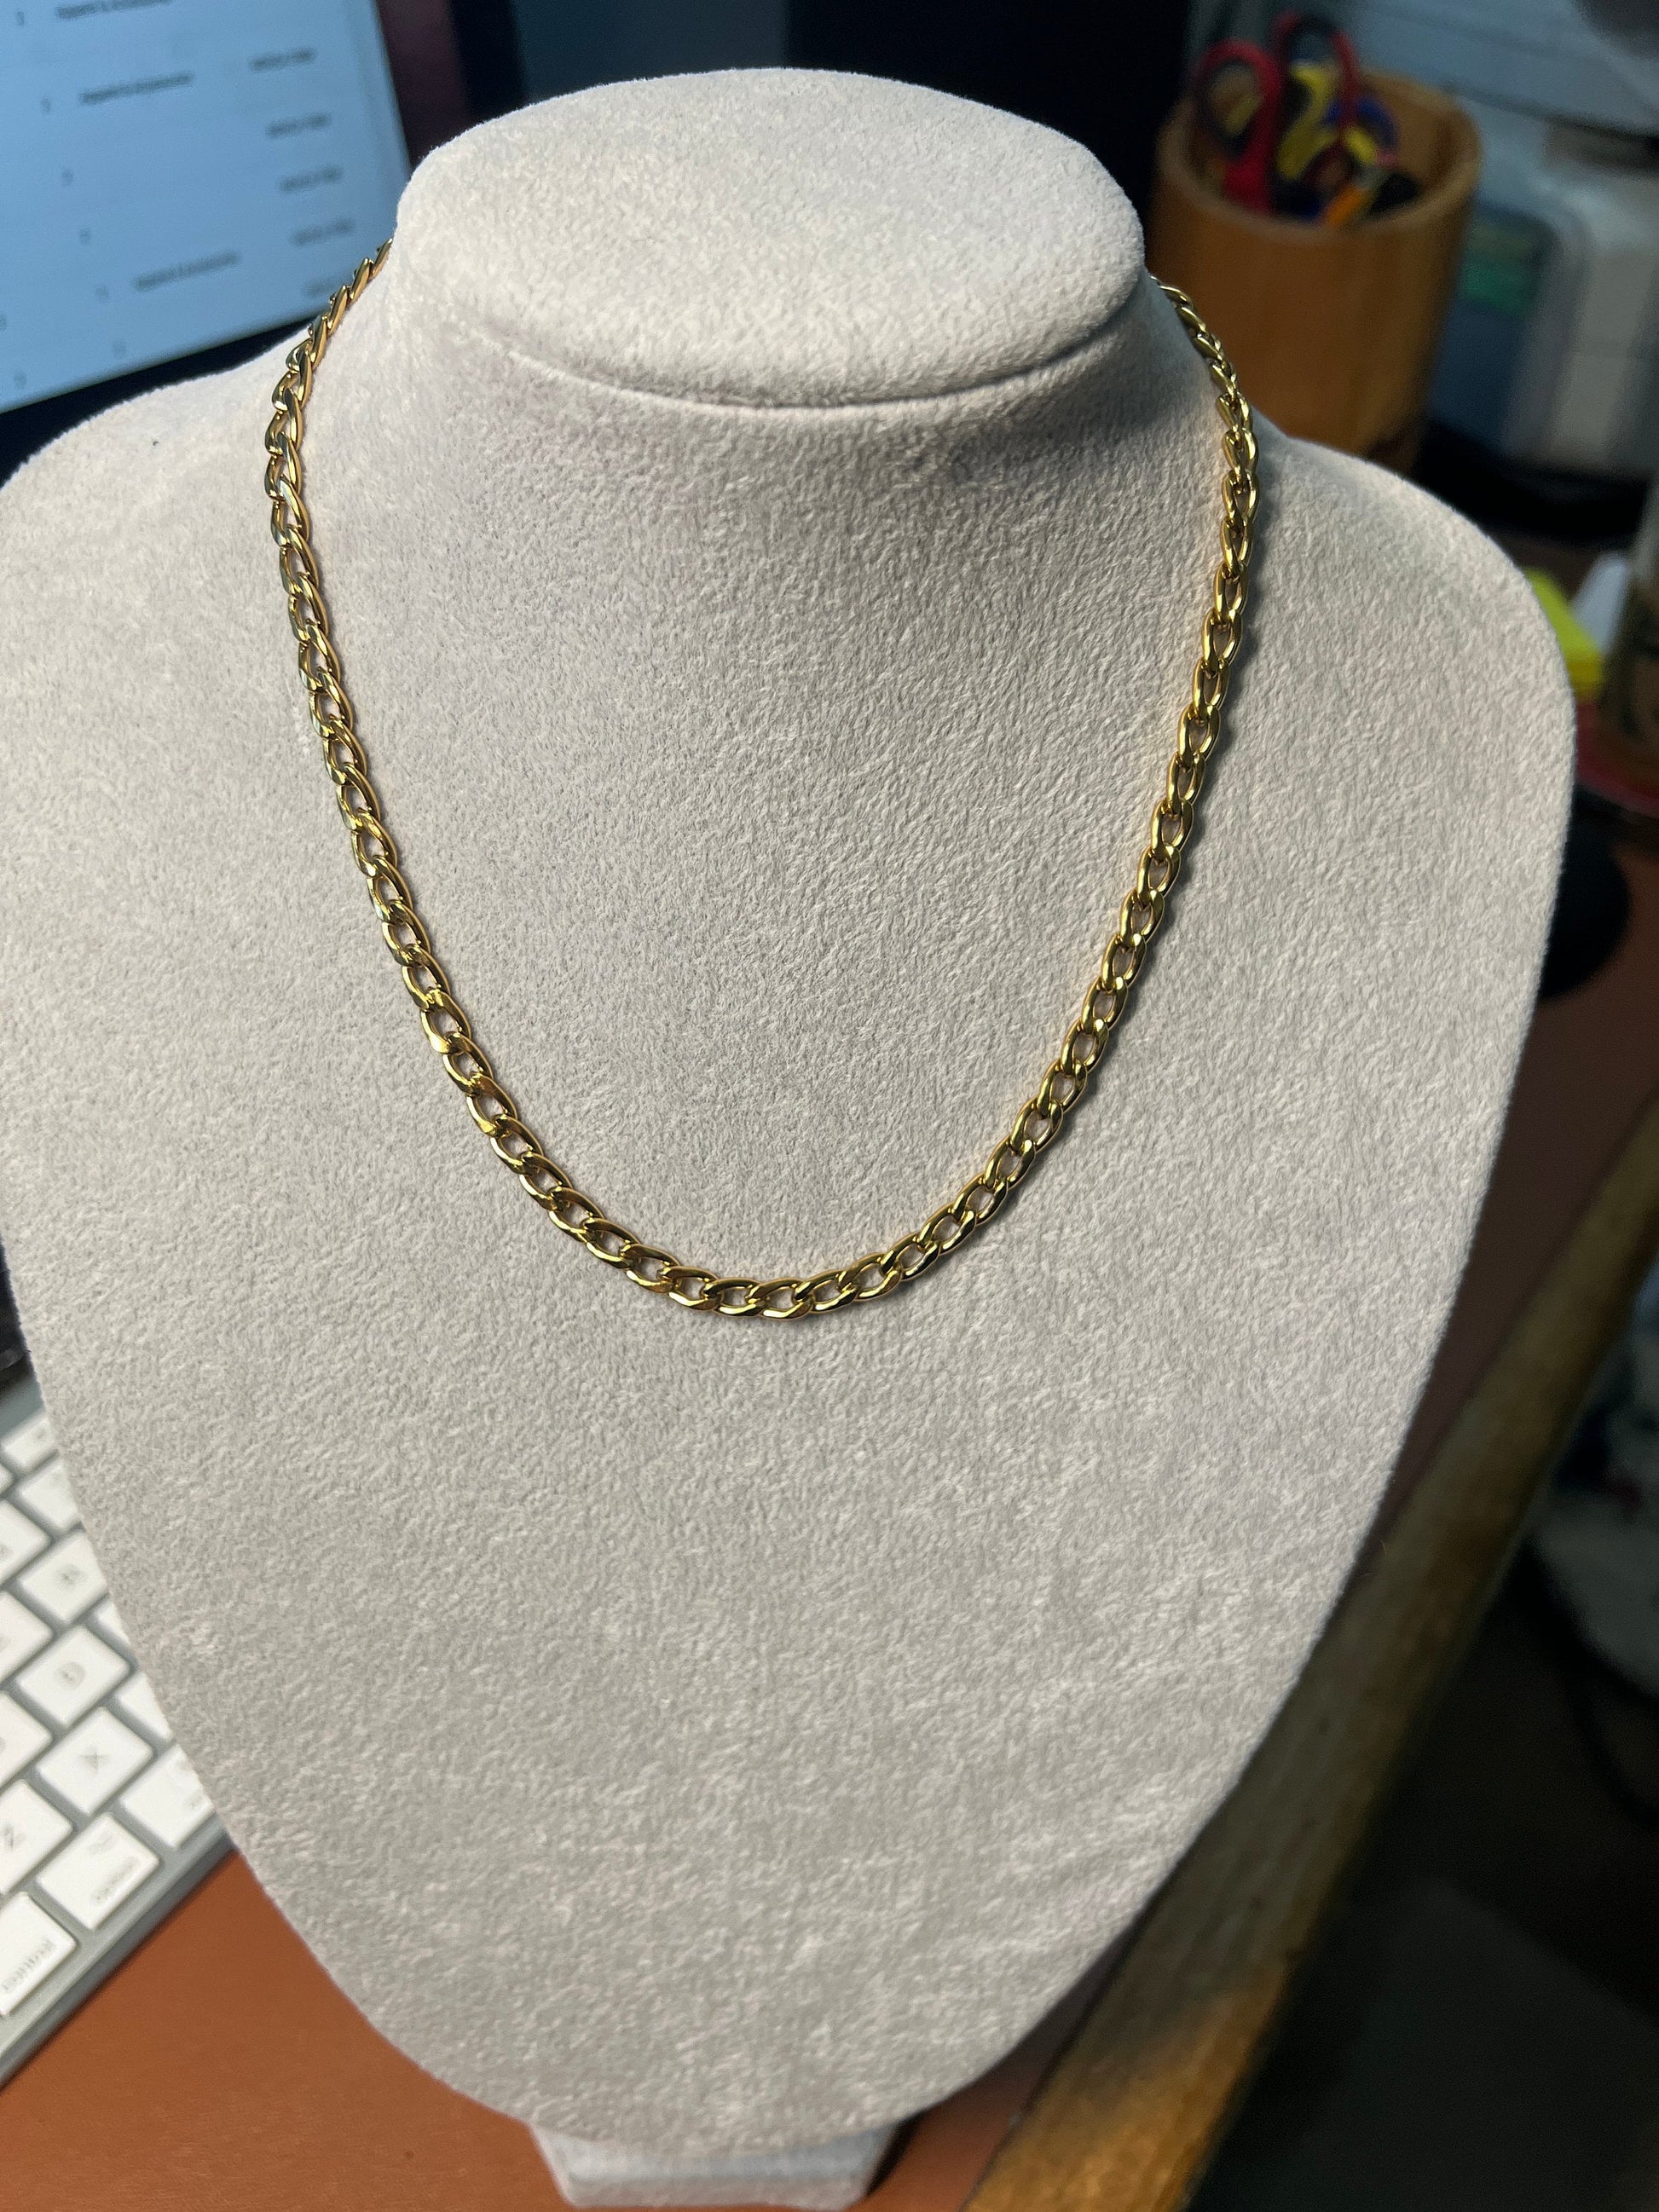 Women's or Child's Chain Necklace, Gold Tone Steel Alloy, 16", 5mm, Cuban Link (#9)